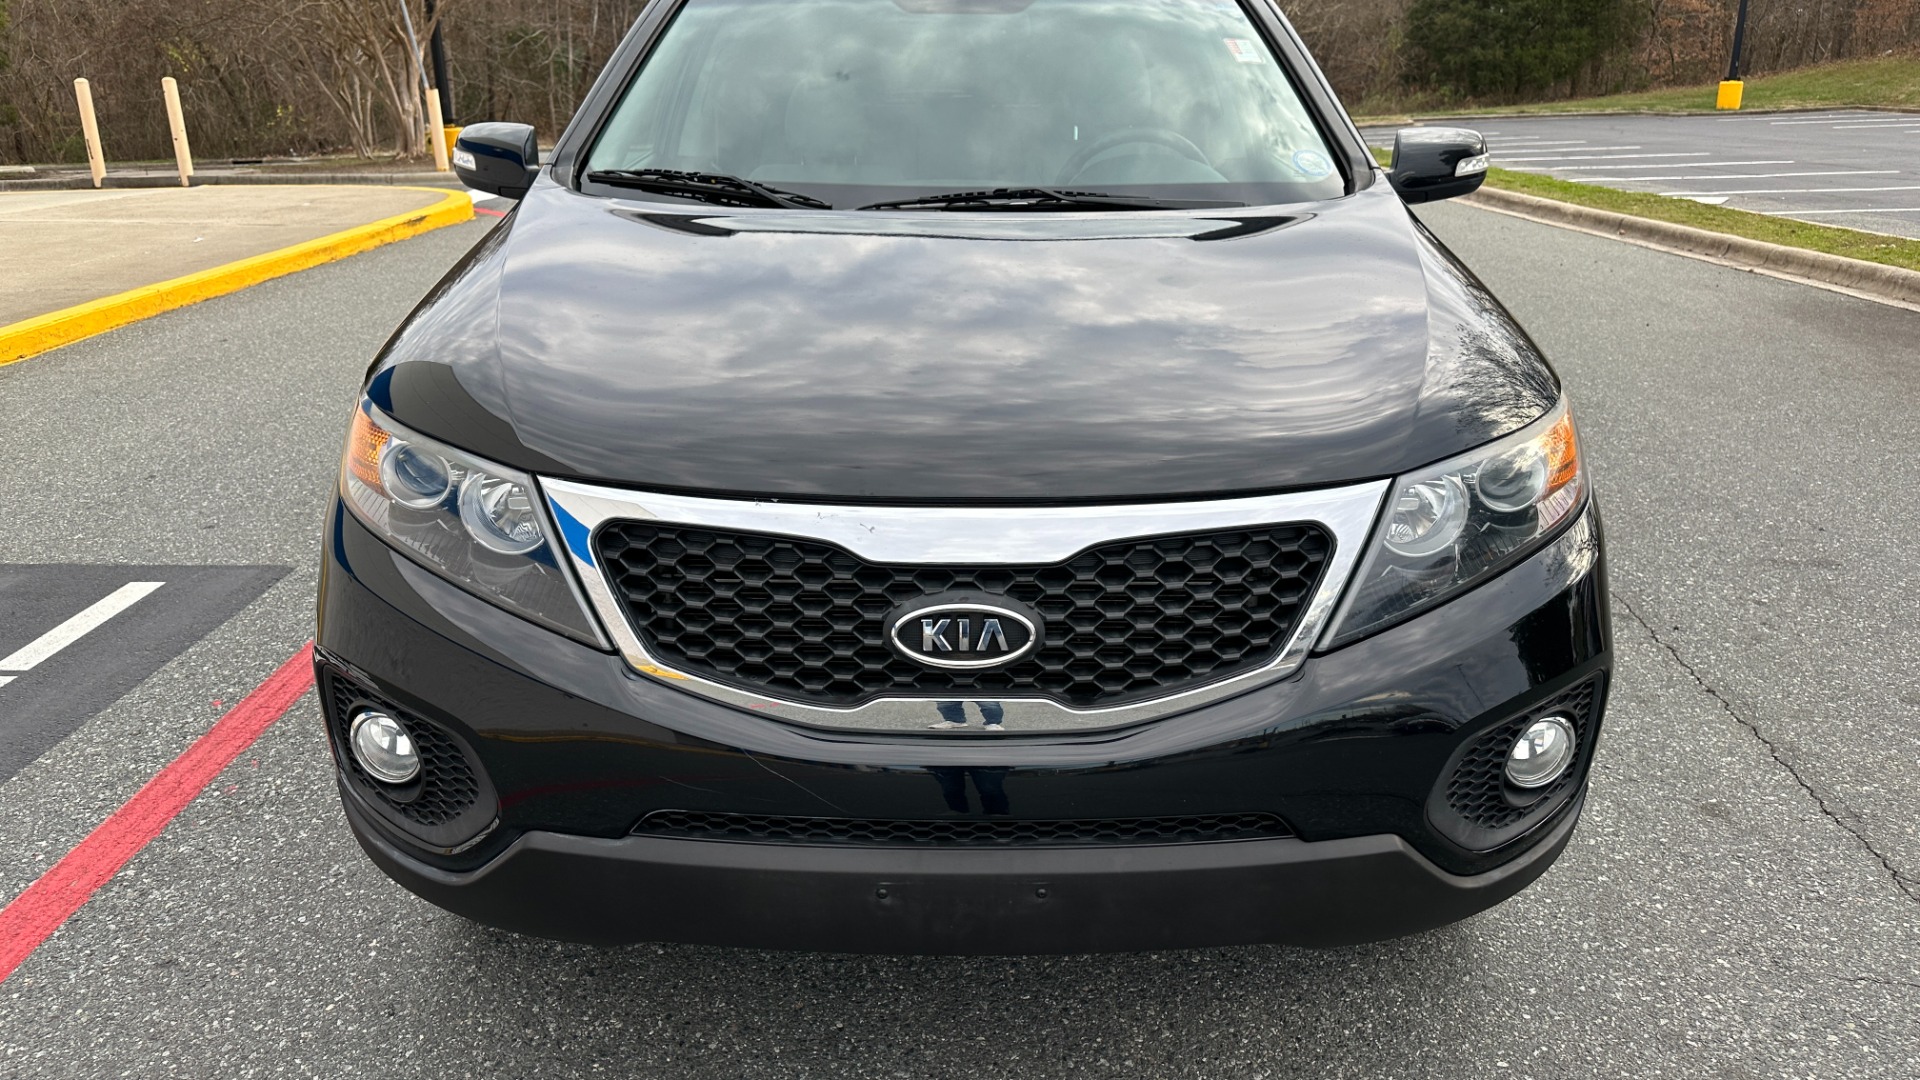 Used 2013 Kia Sorento LX / CONVENIENCE / AWD / 4CYL / CLOTH INTERIOR / ROOF RACK for sale Sold at Formula Imports in Charlotte NC 28227 40